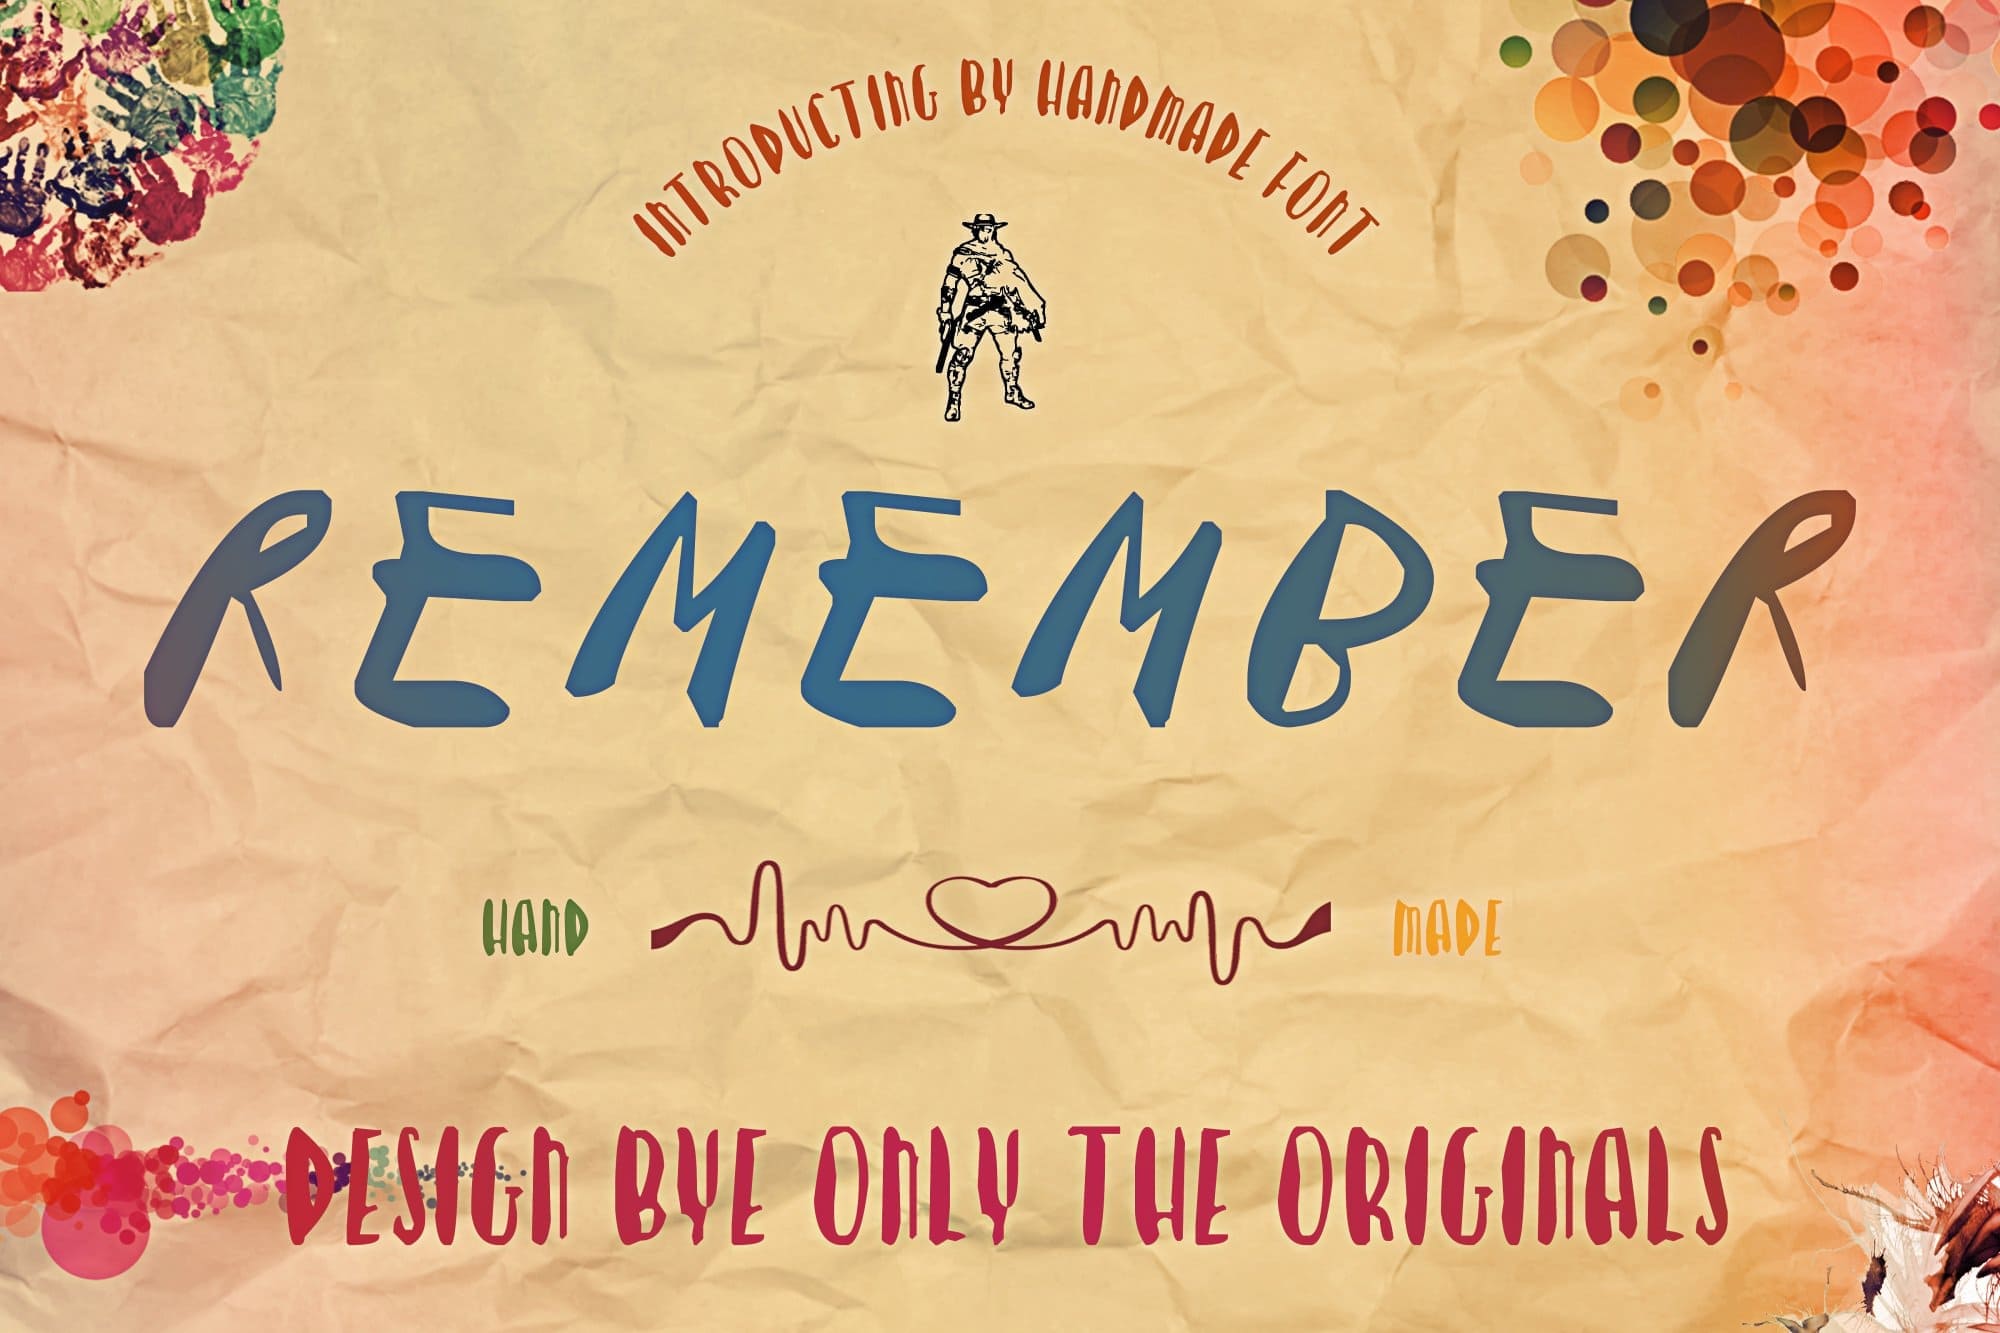 Introducing by handmade font “Remember” design by only the originals.